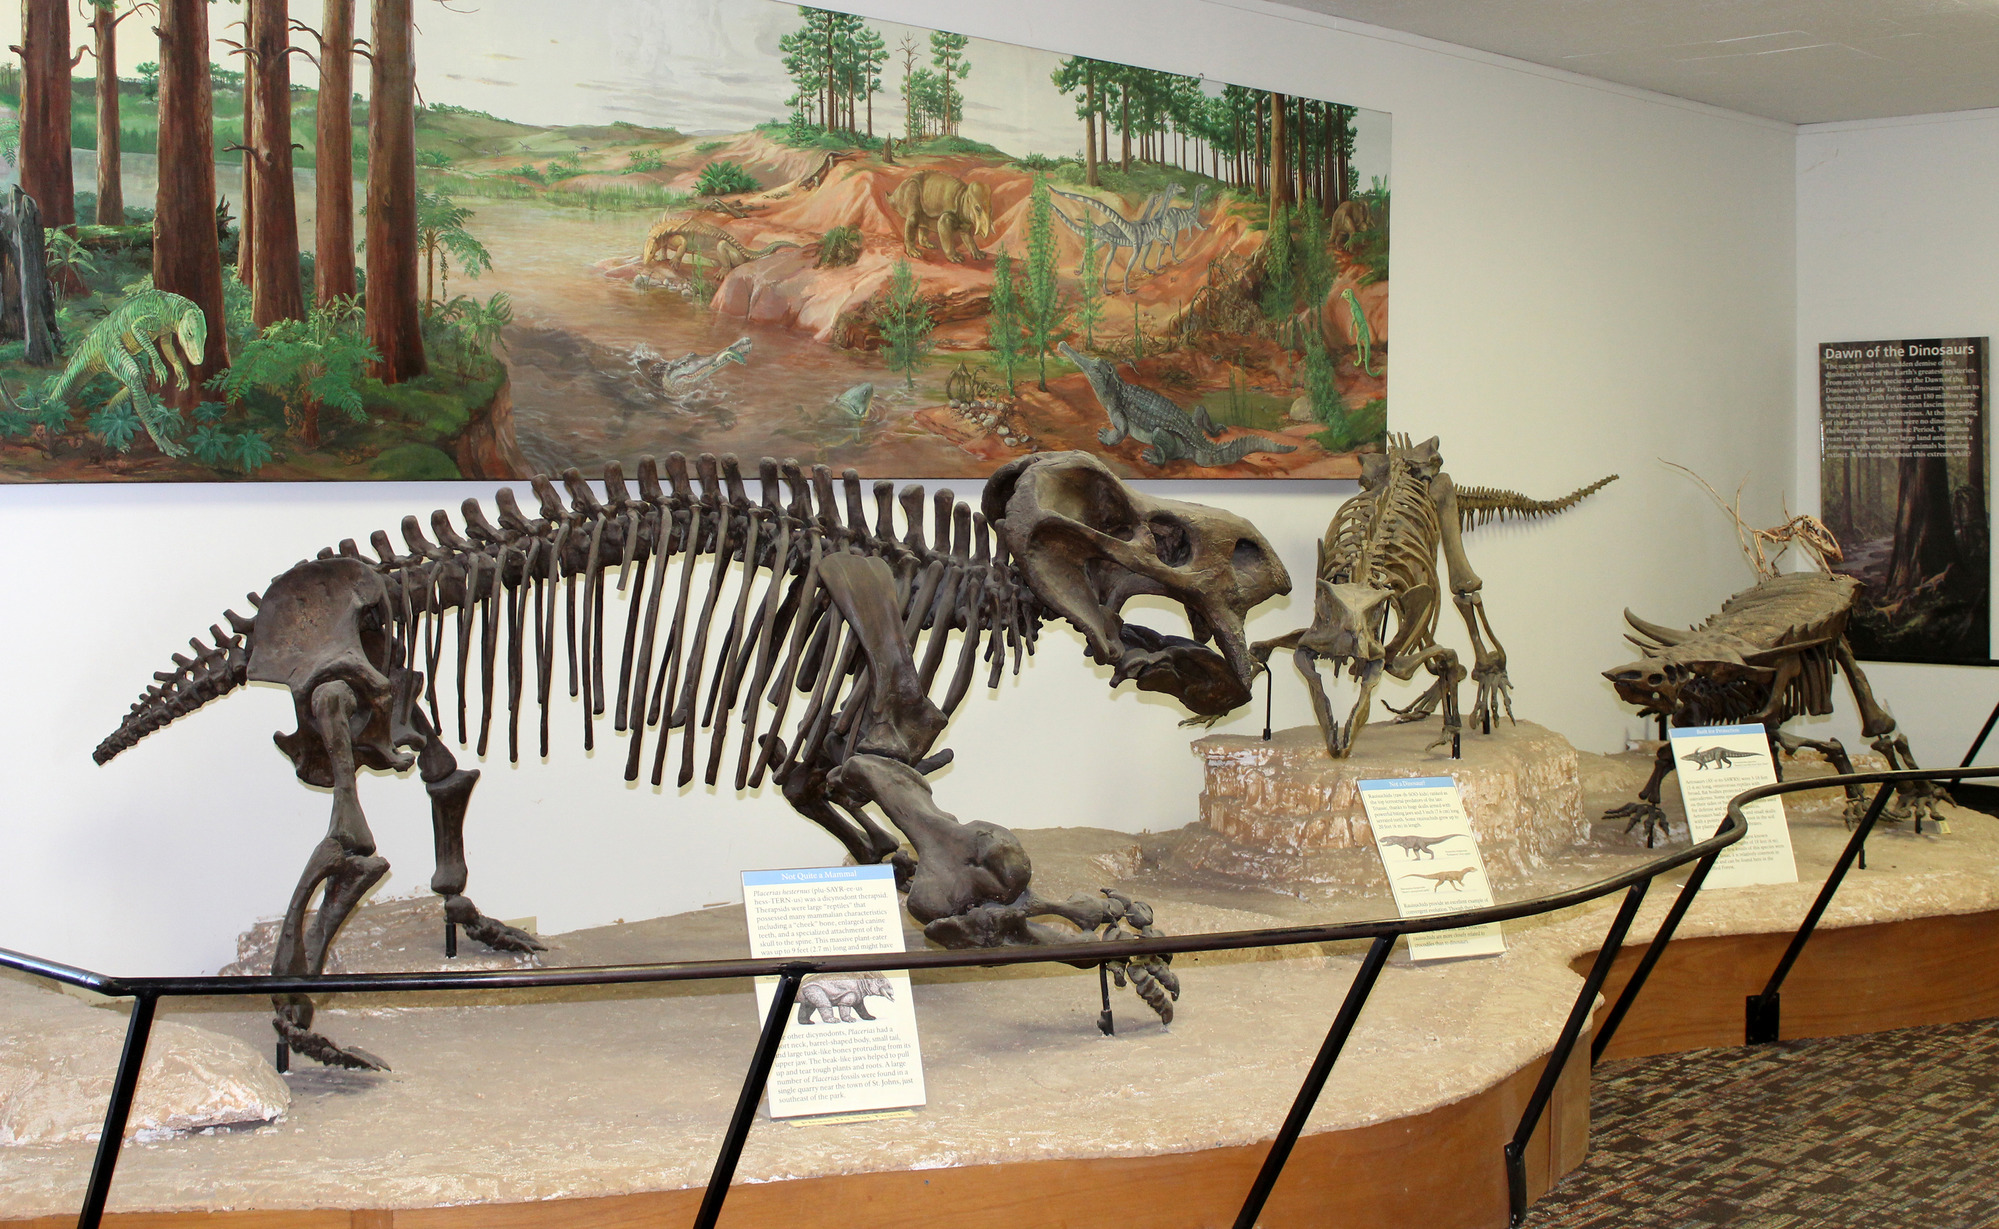 Giant reptile cast diorama at the Rainbow Forest Museum including placerias, postosuchus, and aetosaur in front of historic mural by Margaret Colbert.